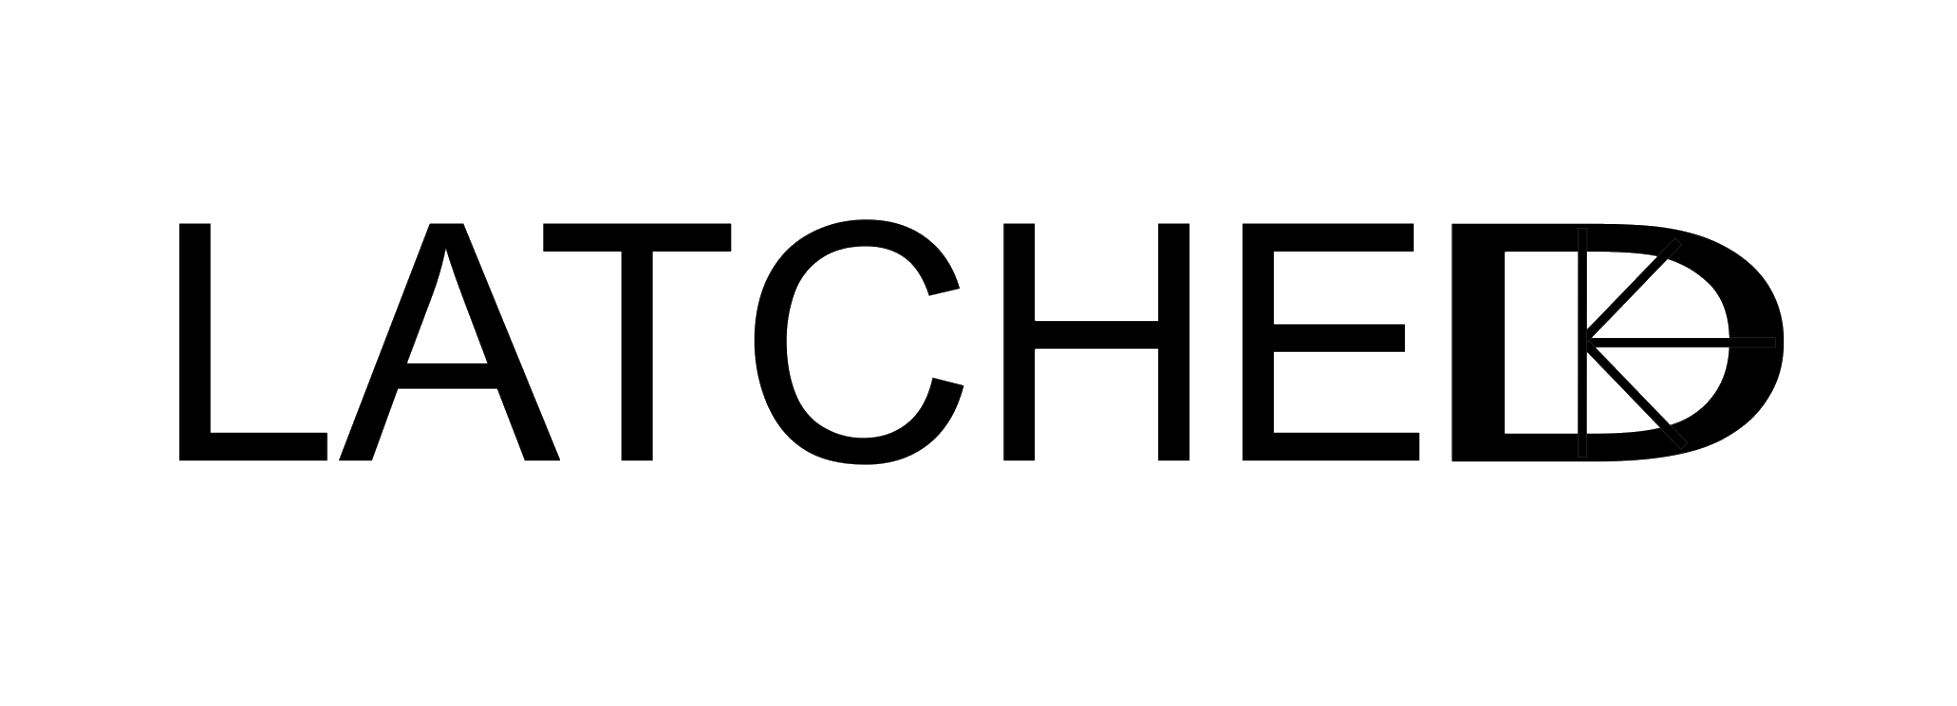 Latched's logo